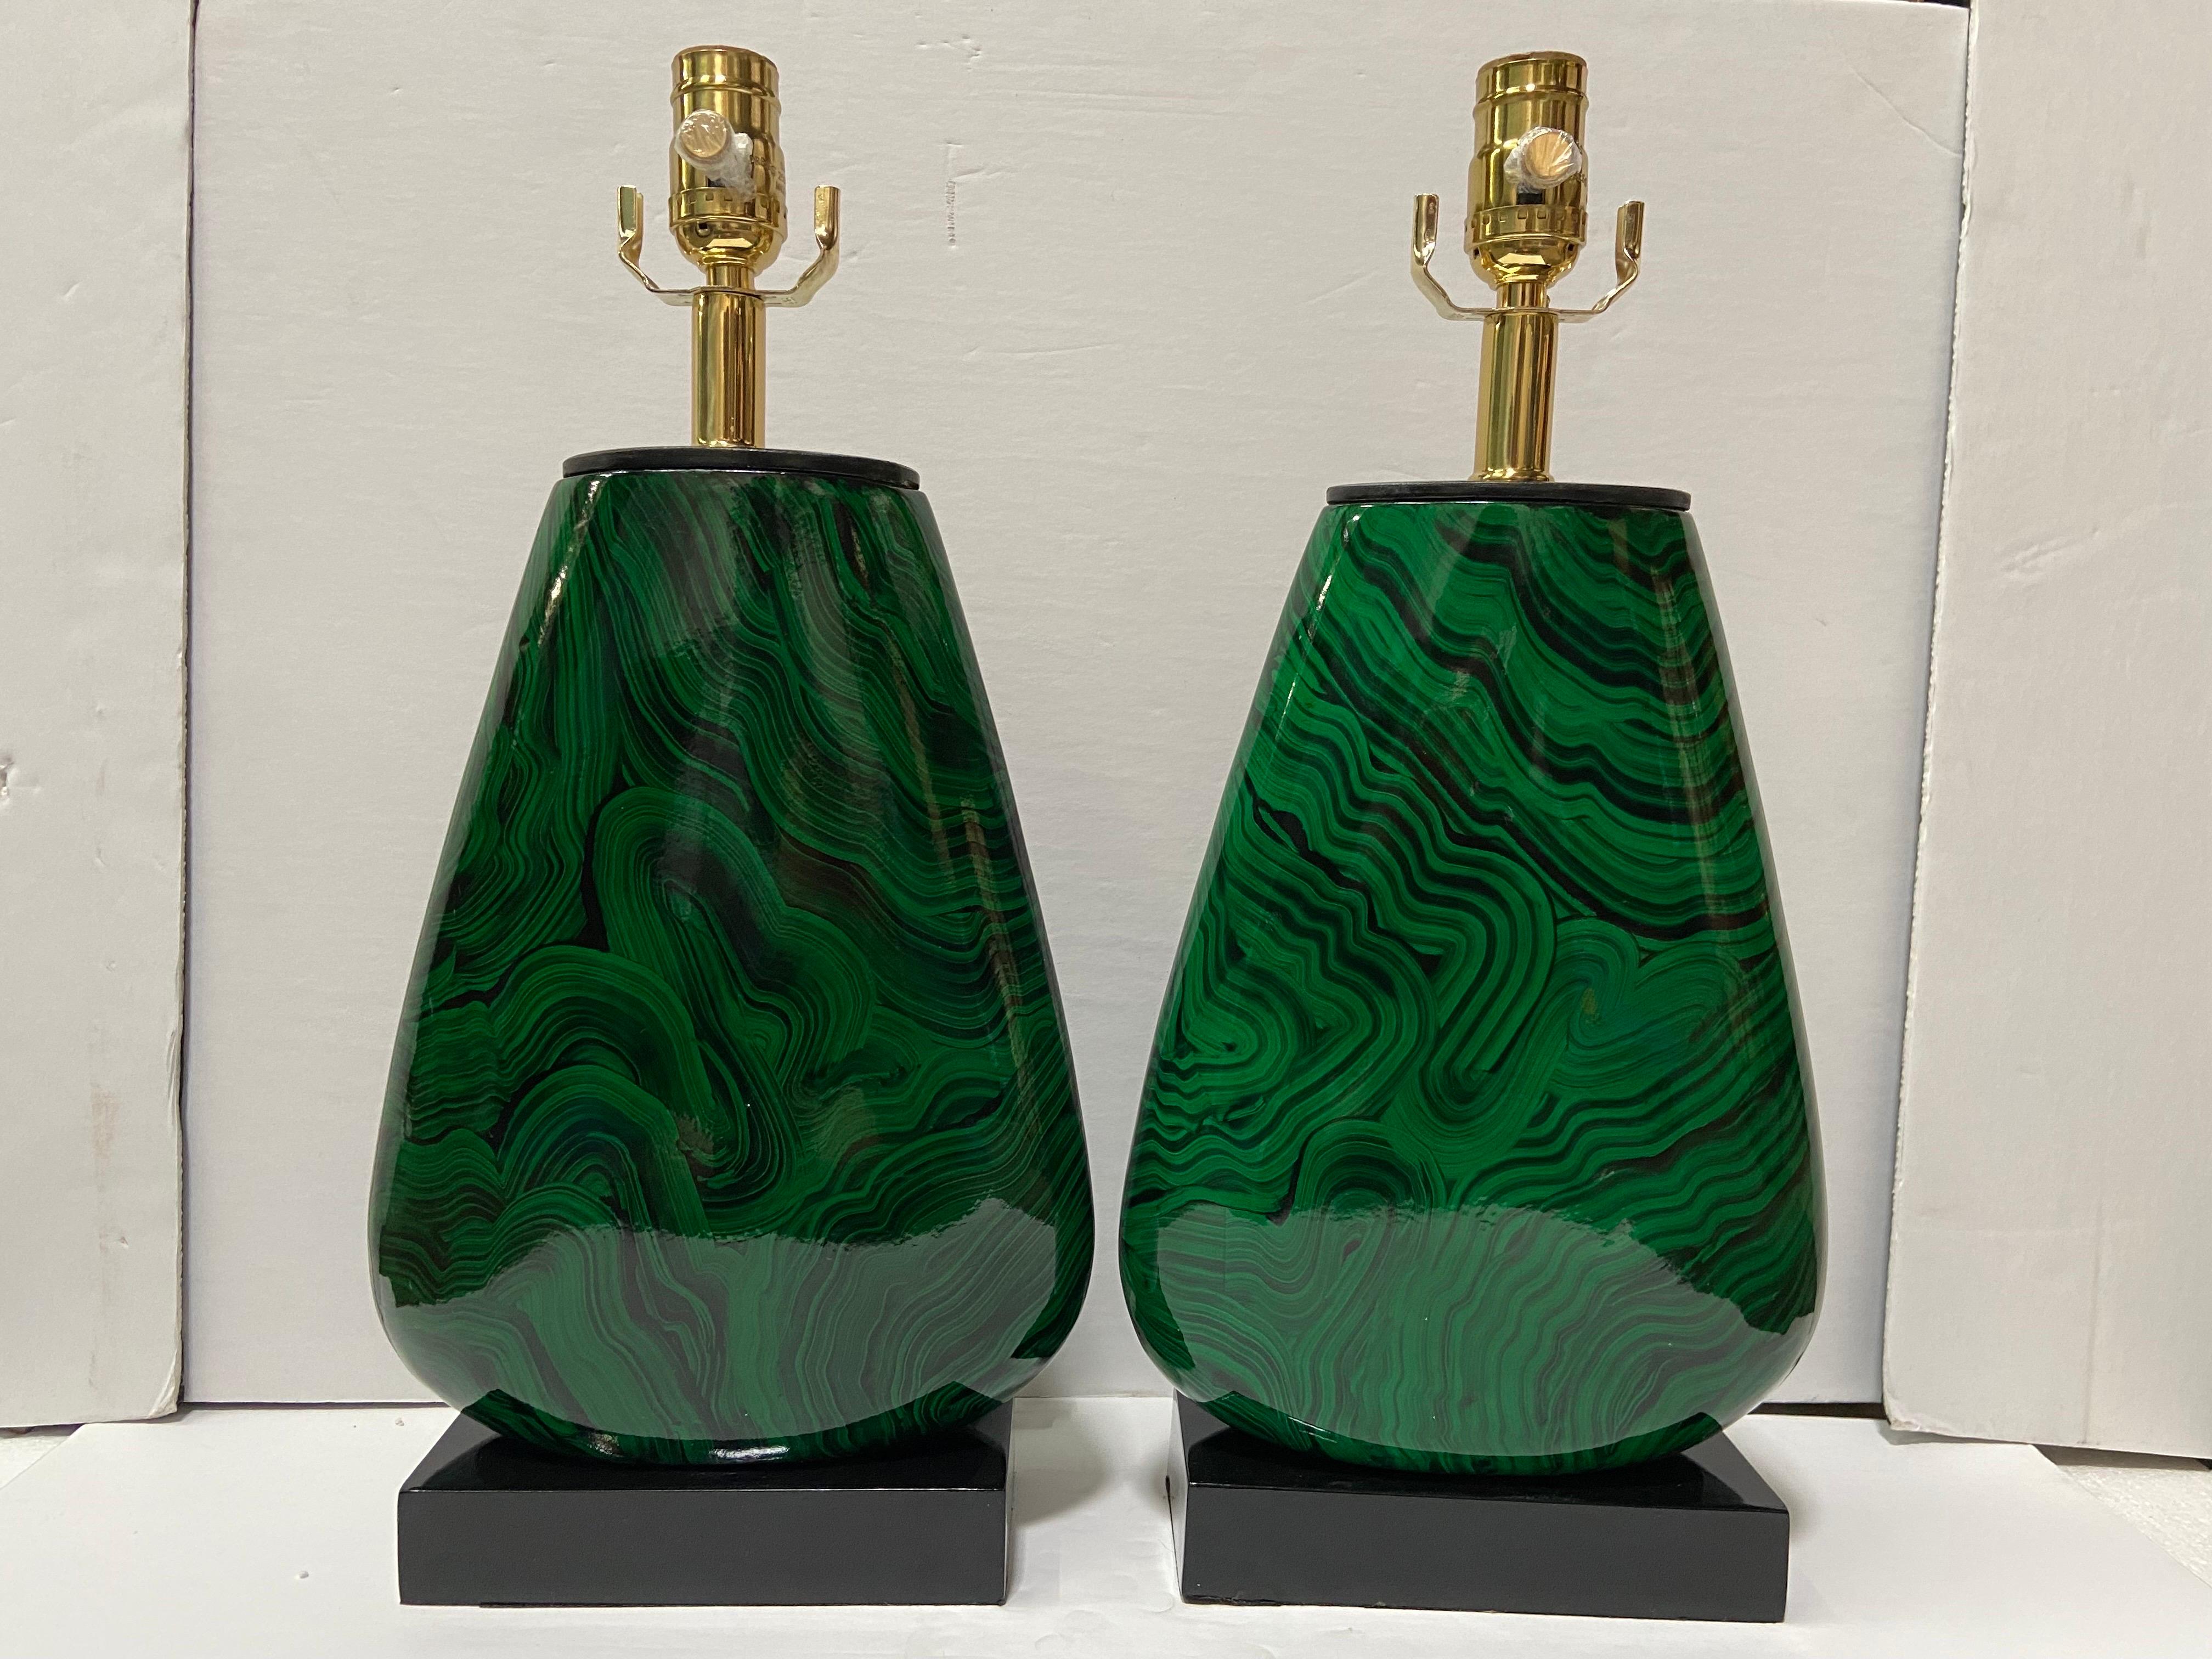 A vintage pair of faux malachite wood vessel forms by the John-Richard brand converted into table lamps. This pair of lamps features a wood vessel faux painted as malachite, set atop a rectangular black painted wood base. There is a black painted